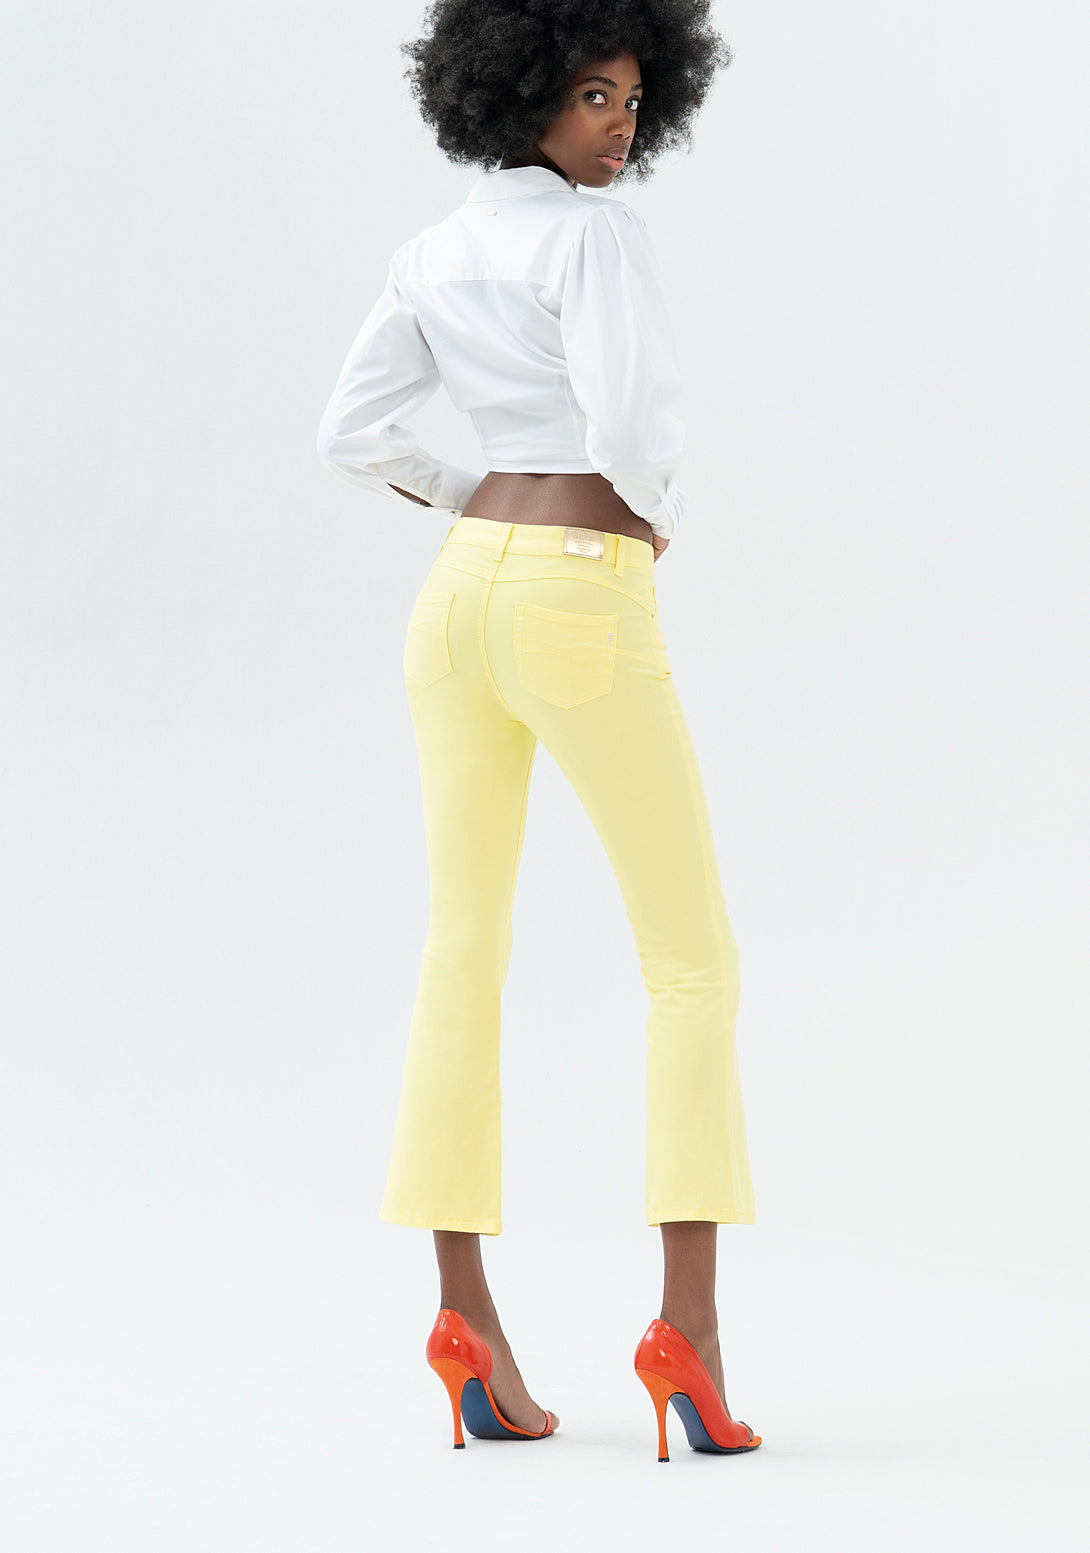 Jeans Bella flare cropped made with a sophisticated and coloured stretch denim